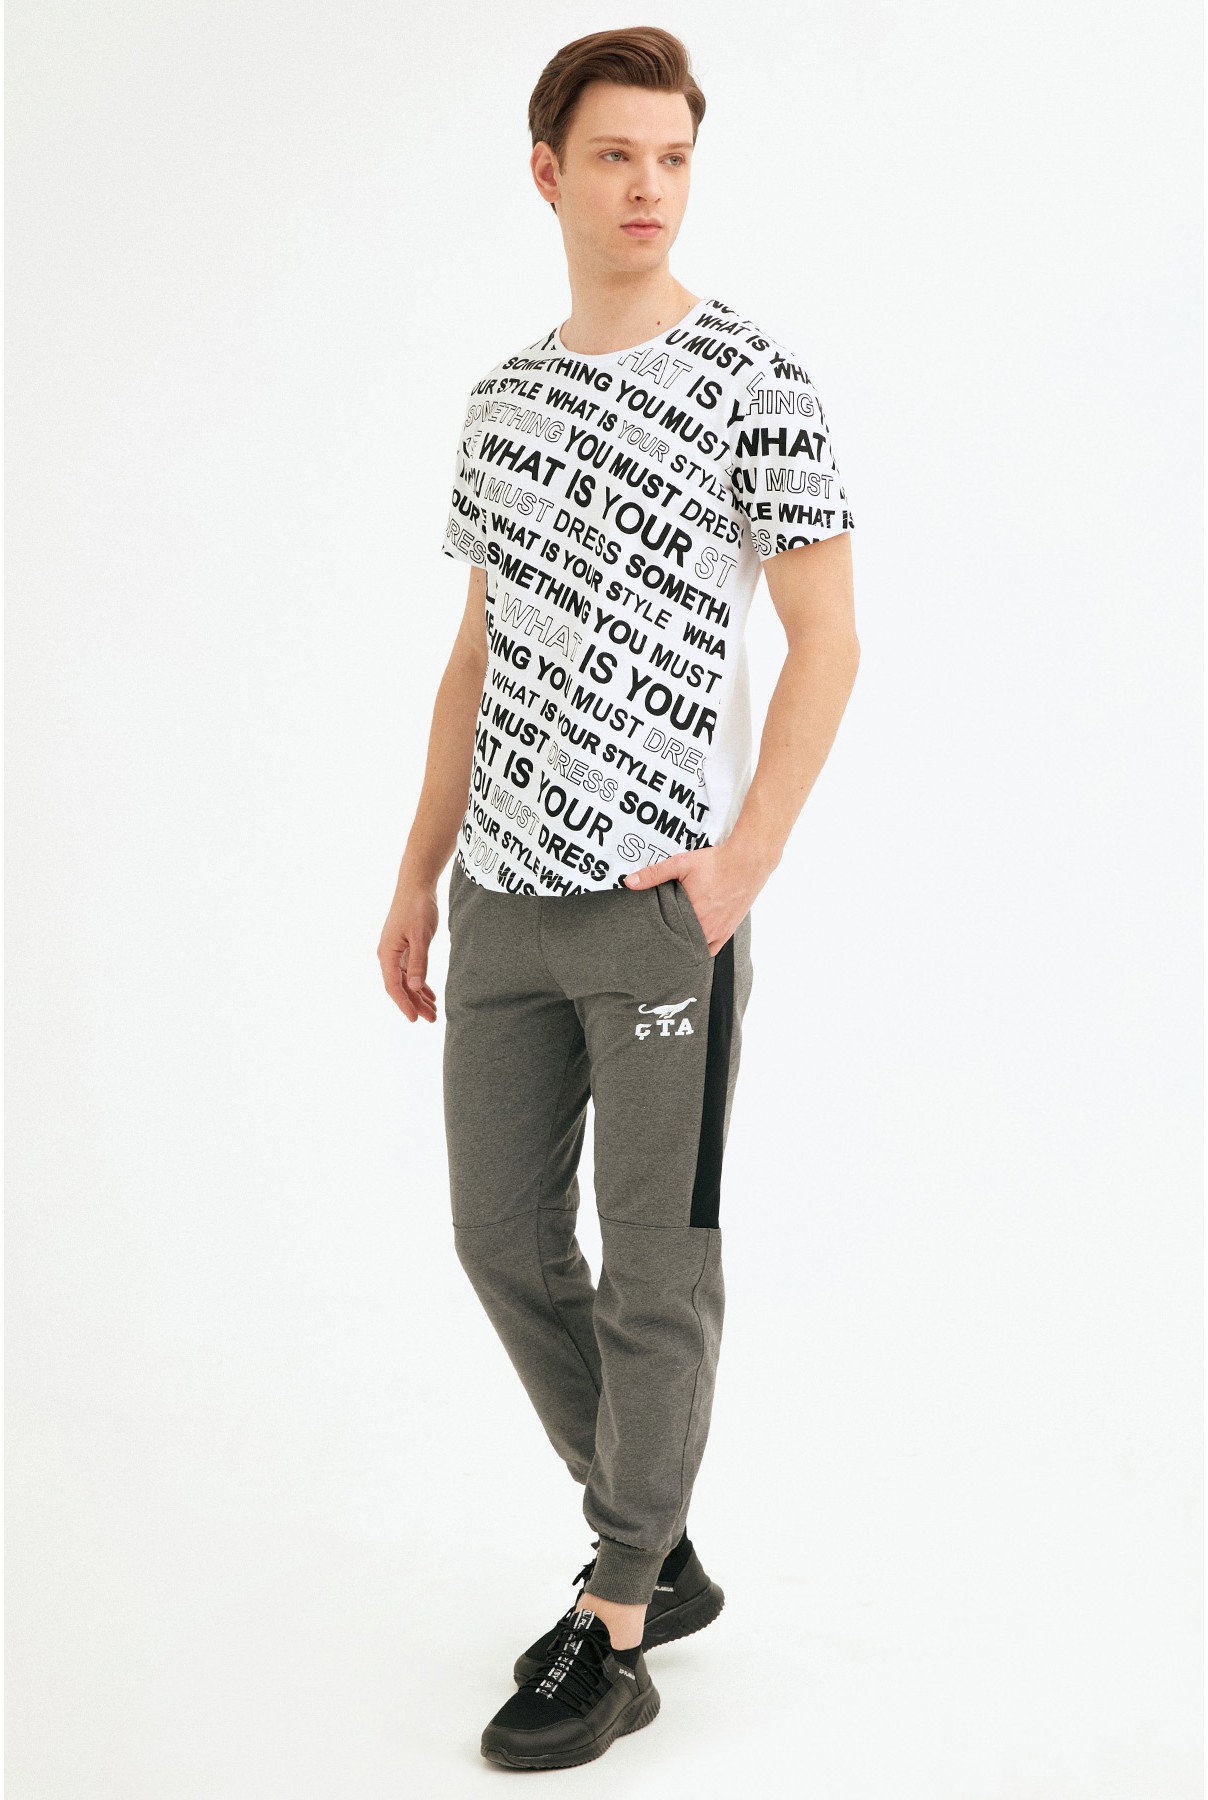 Men's trousers with side letters